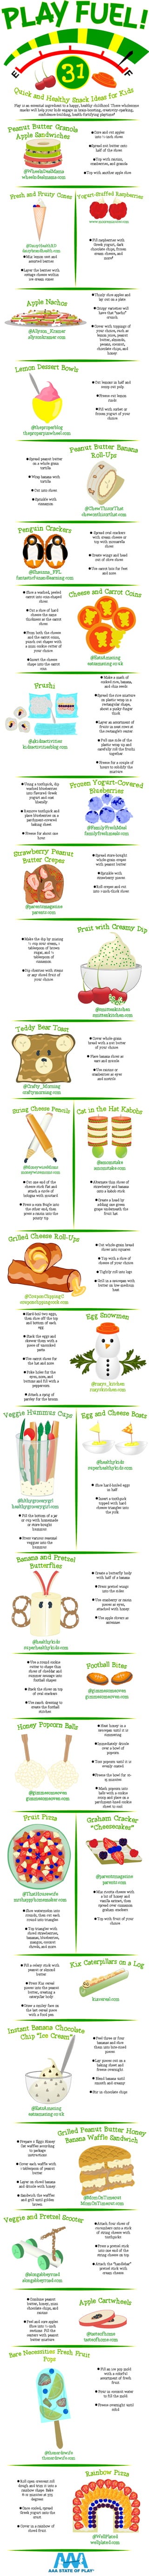 Play Fuel! 31 Quick and Healthy Snack Ideas for Kids